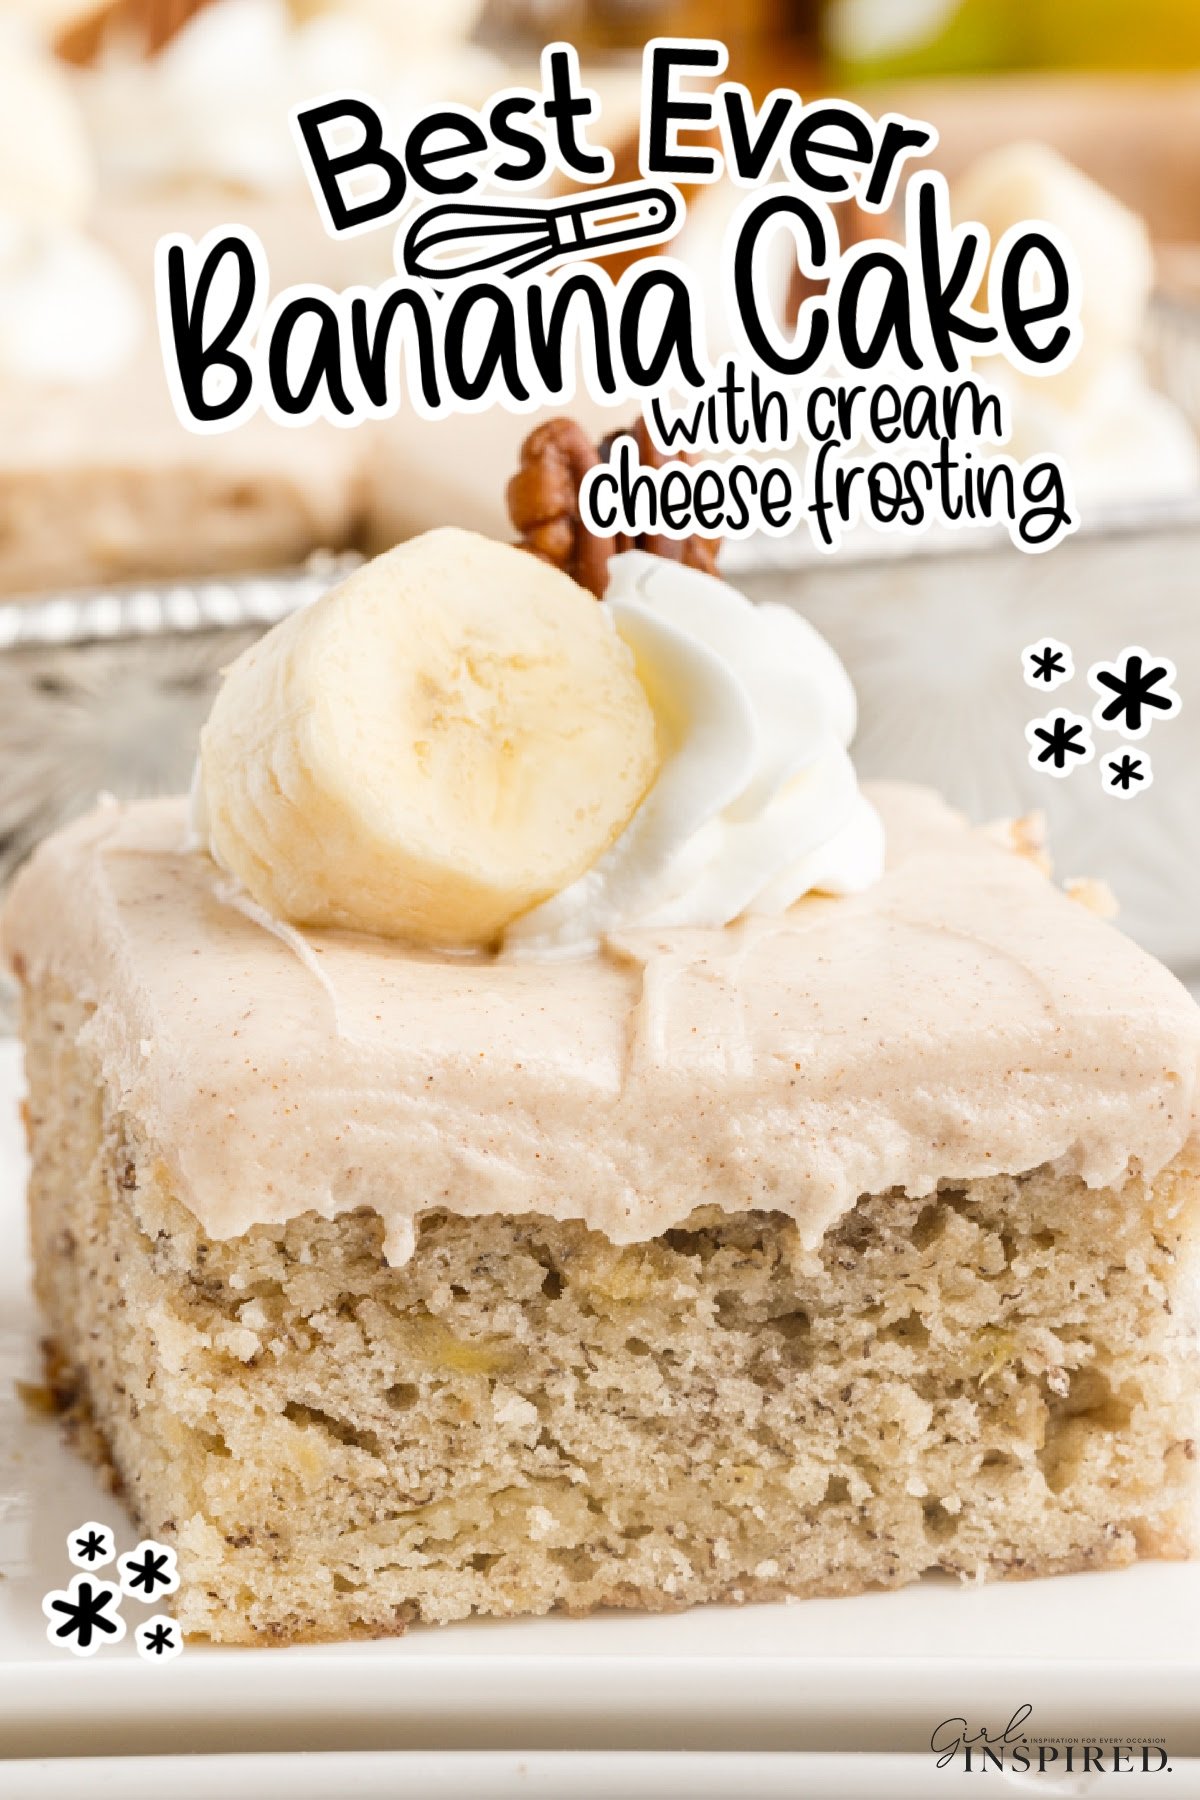 Slice of Banana Cake with cream cheese frosting, with text overlay.